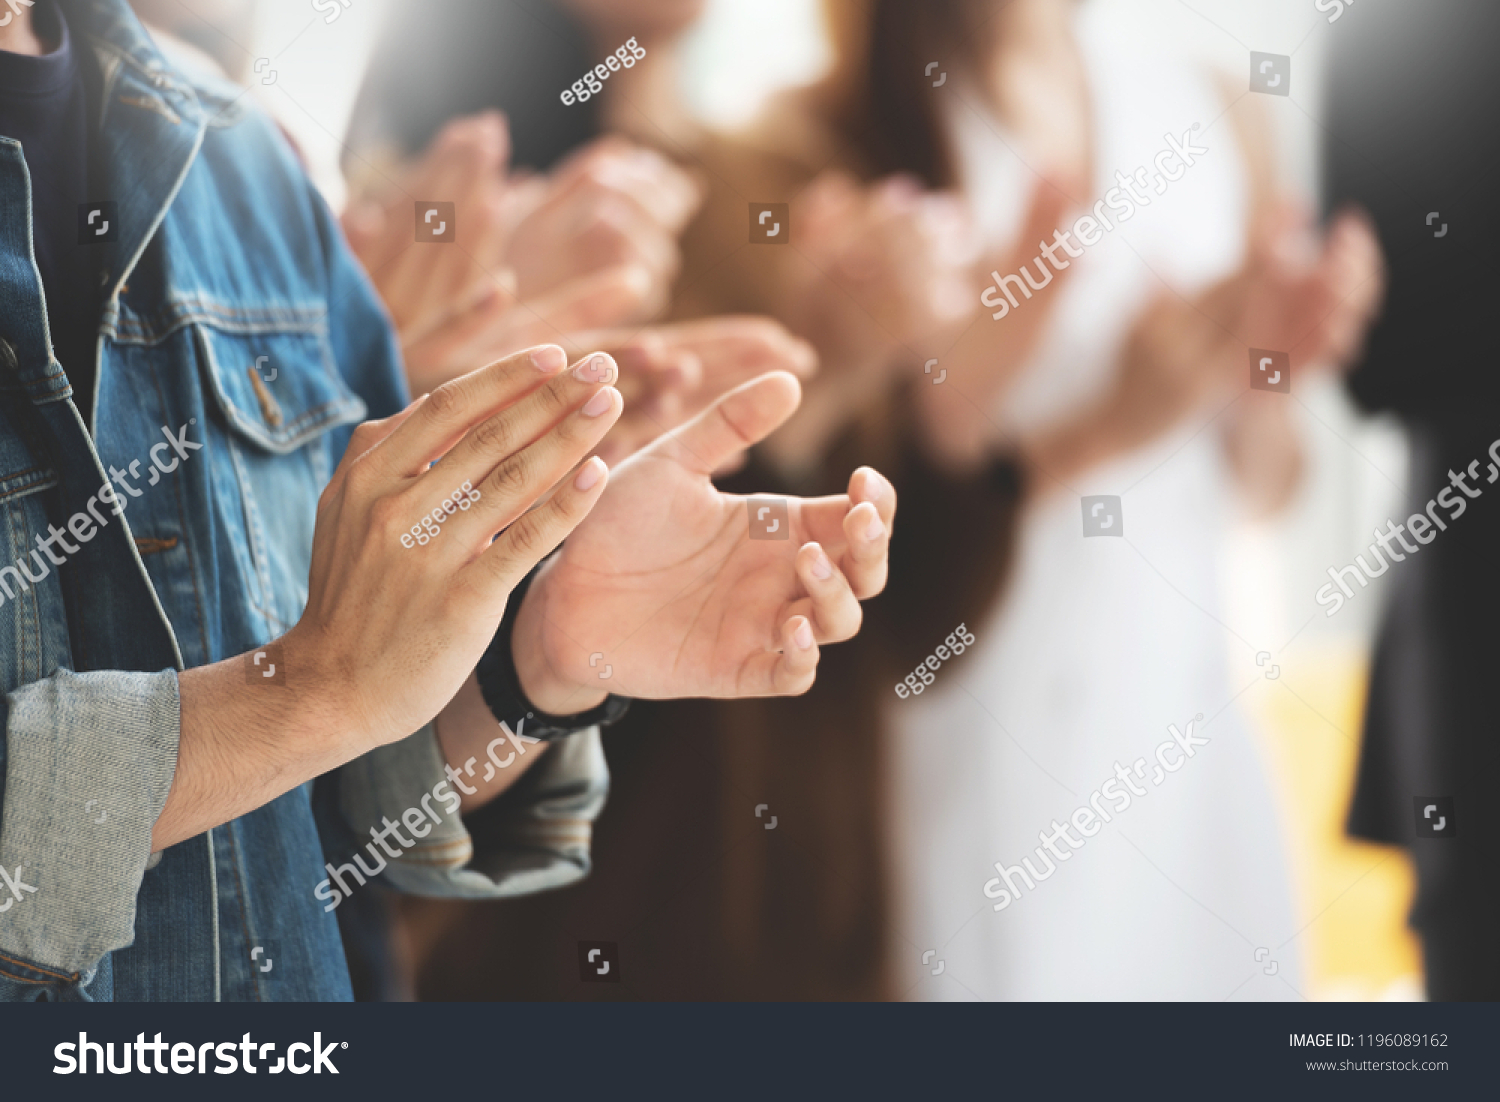 Selective Focus on hands. Creative designers audience applauding at a business seminar. Asian People listening and clapping at conference and presentation. #1196089162